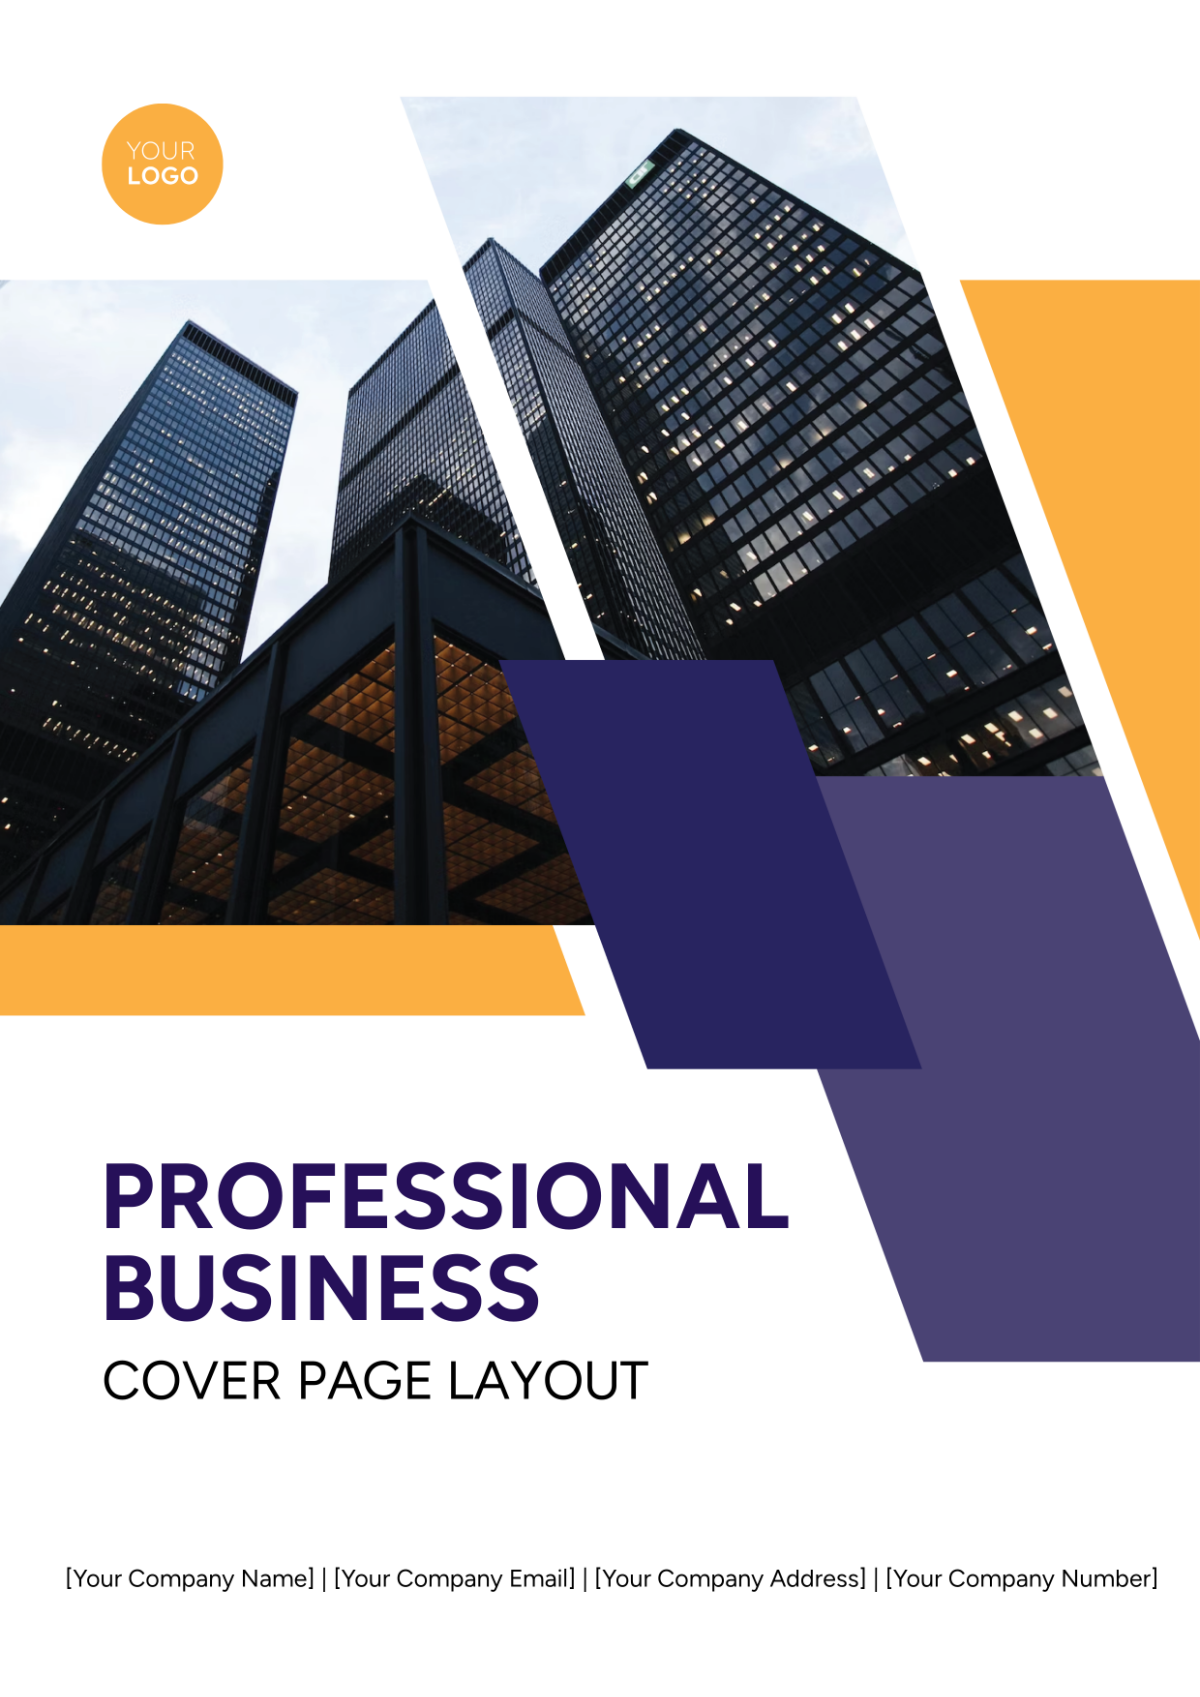 Professional Business Cover Page Layout